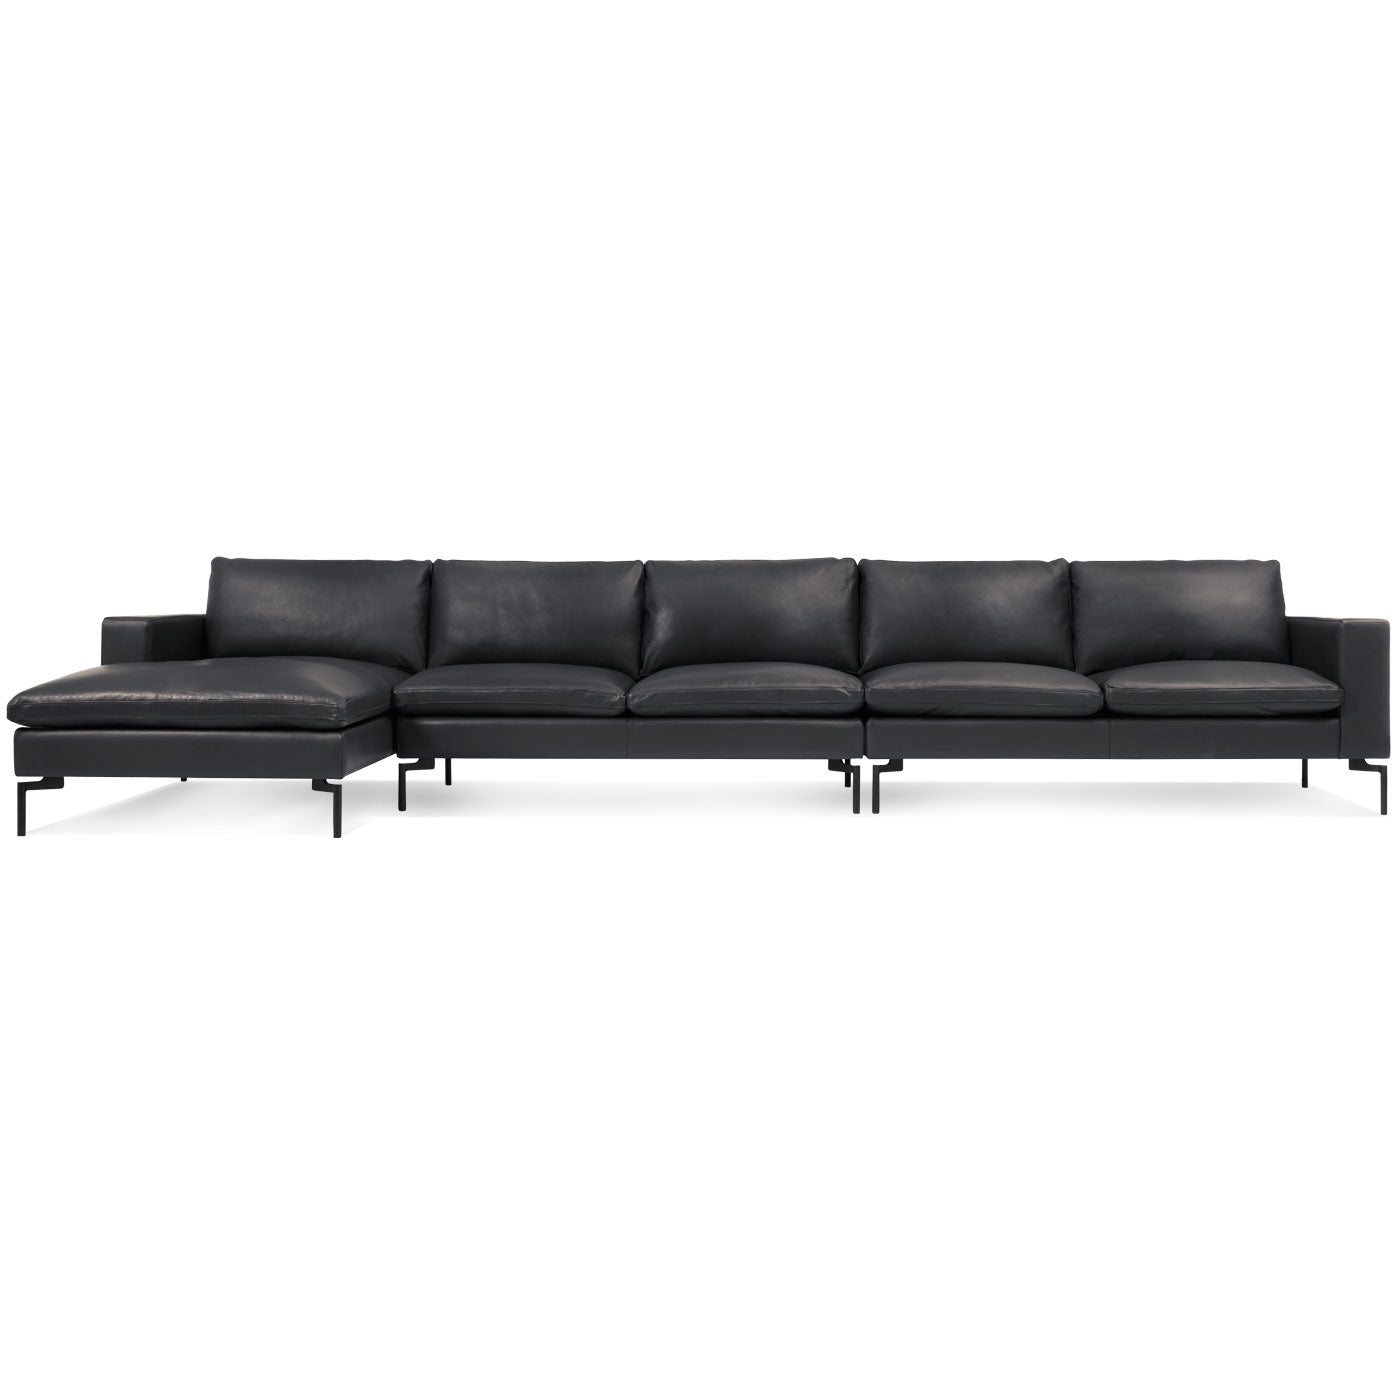 New Standard 165" Leather Sofa Sectional